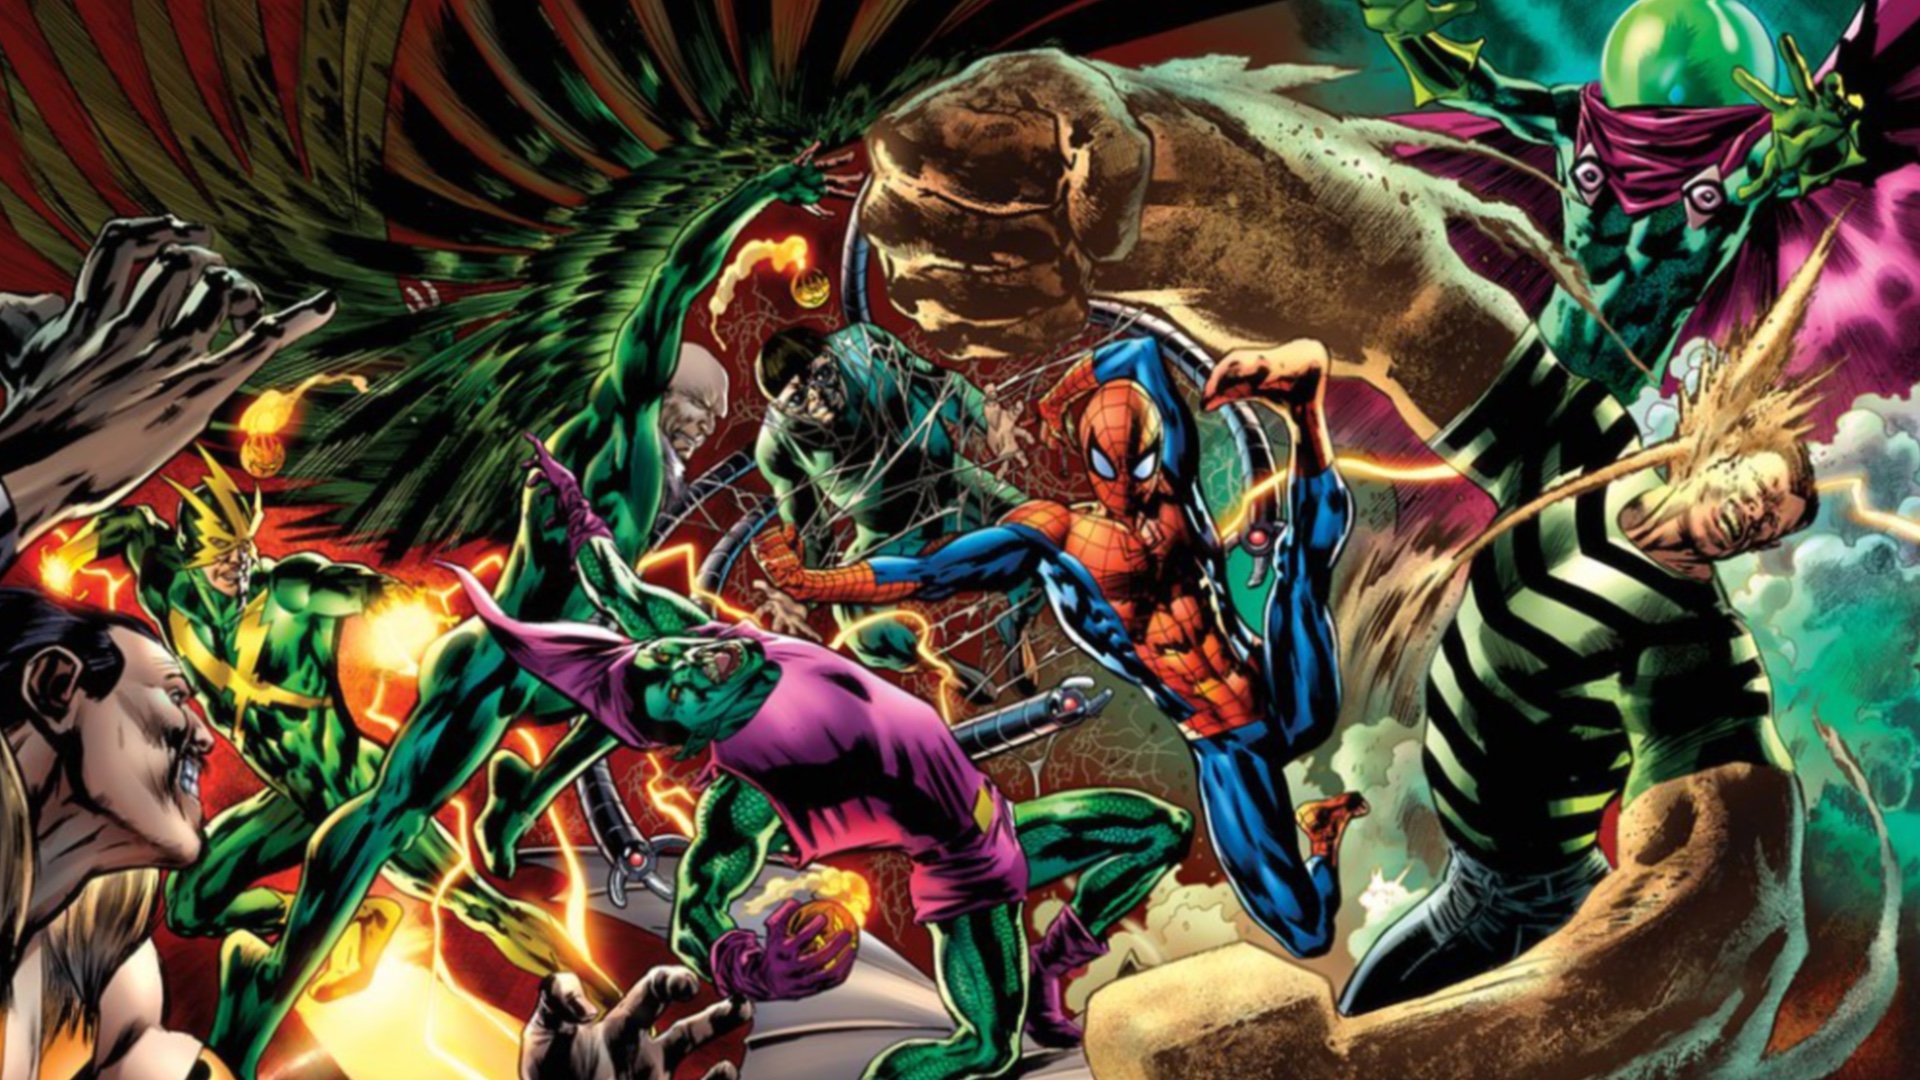 Sinister six